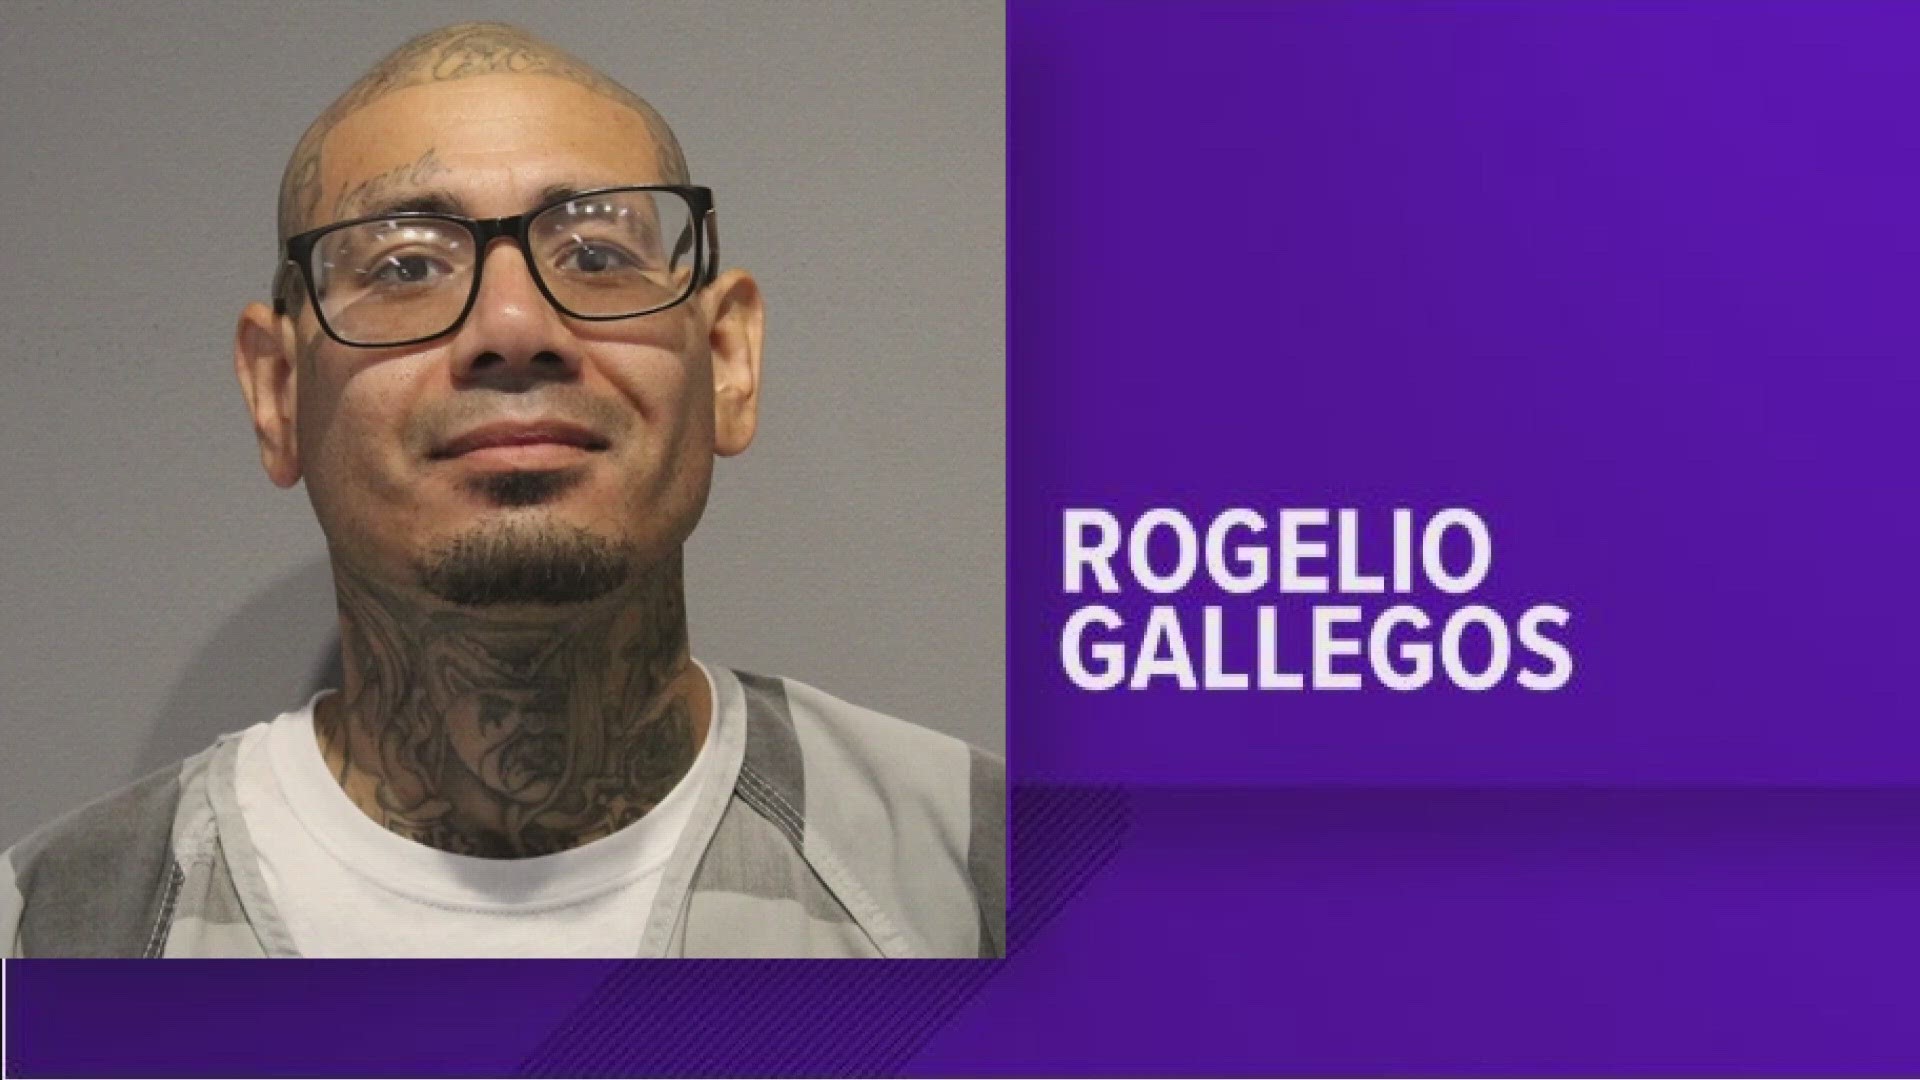 36-year-old Rogelio Gallegos has been charged with the murder of 39-year-old Robert Rojas.